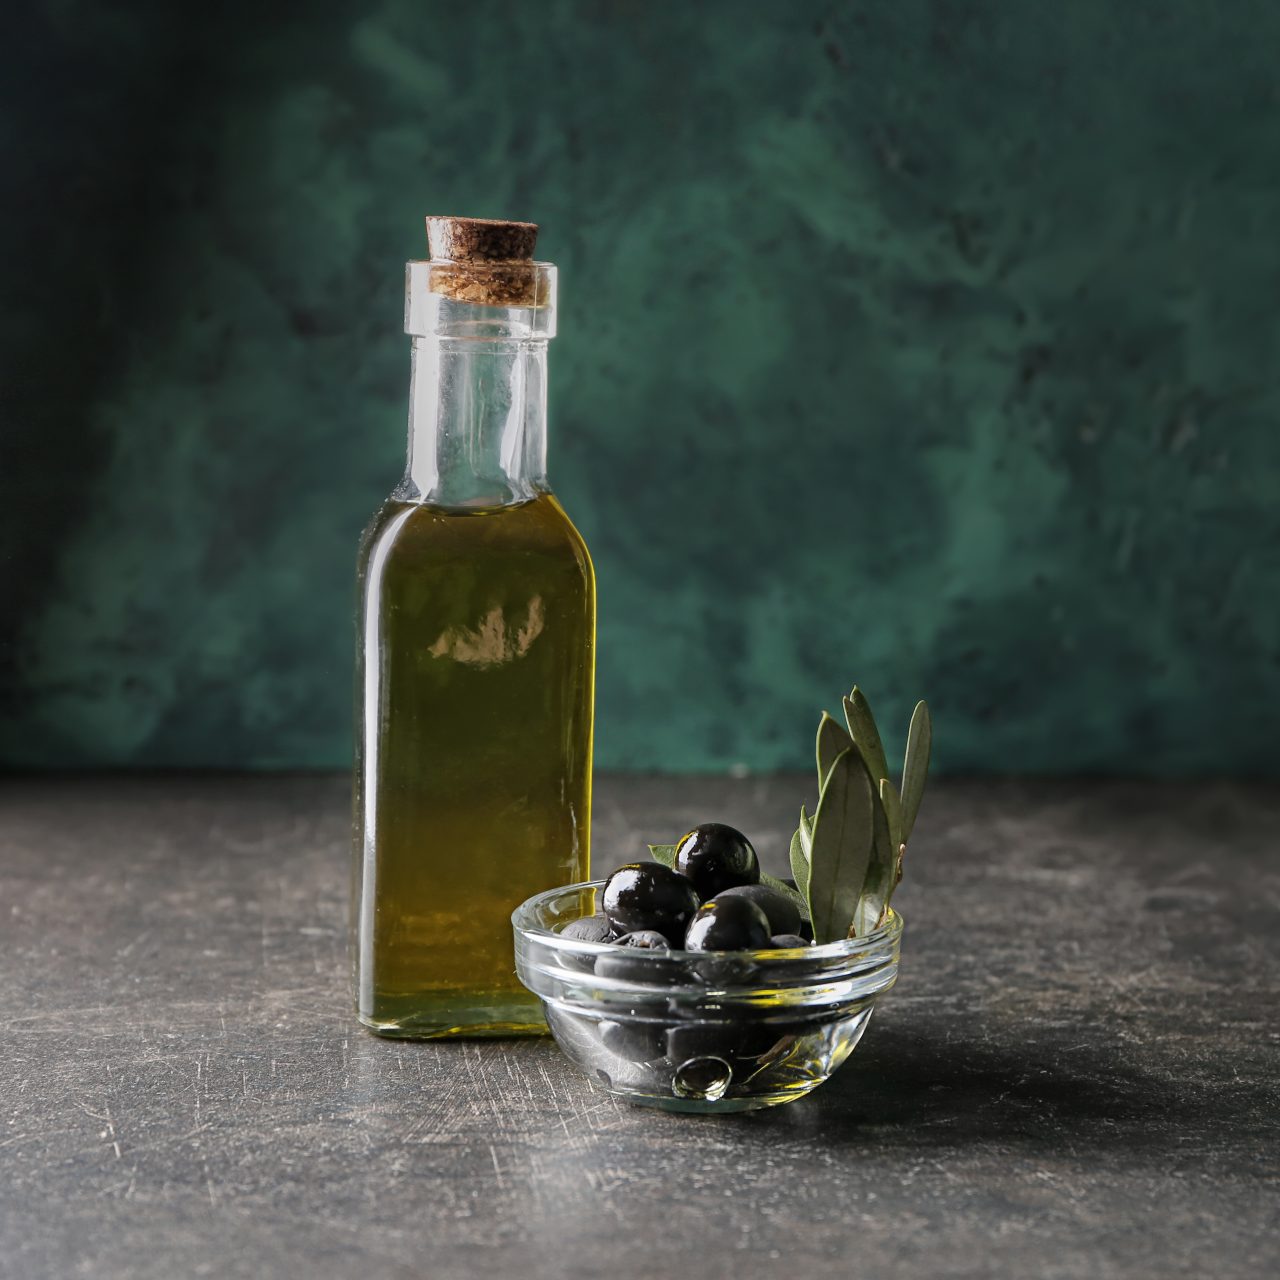 Bottle,With,Oil,And,Canned,Olives,On,Table